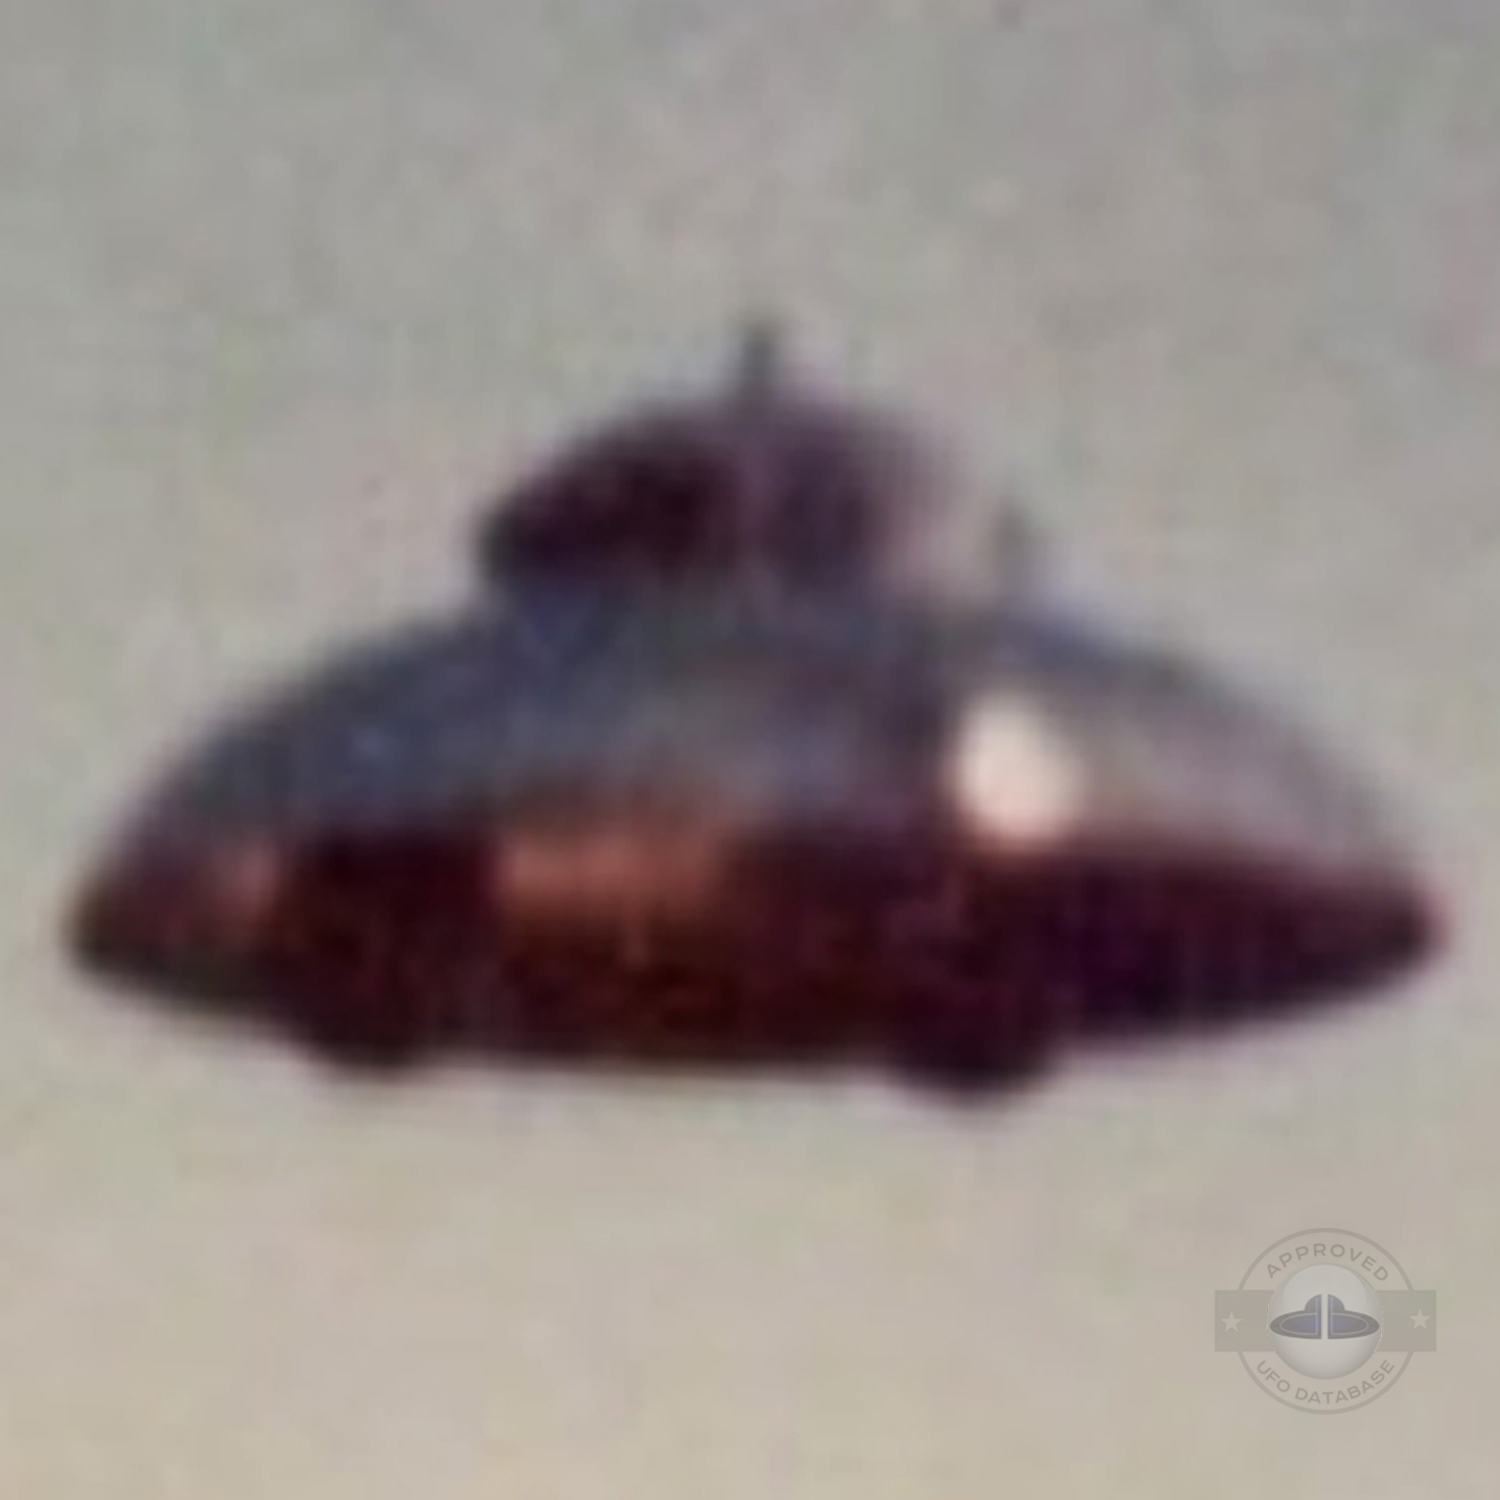 This UFO picture has been in several reports and controversies, 1970s UFO Picture #138-7